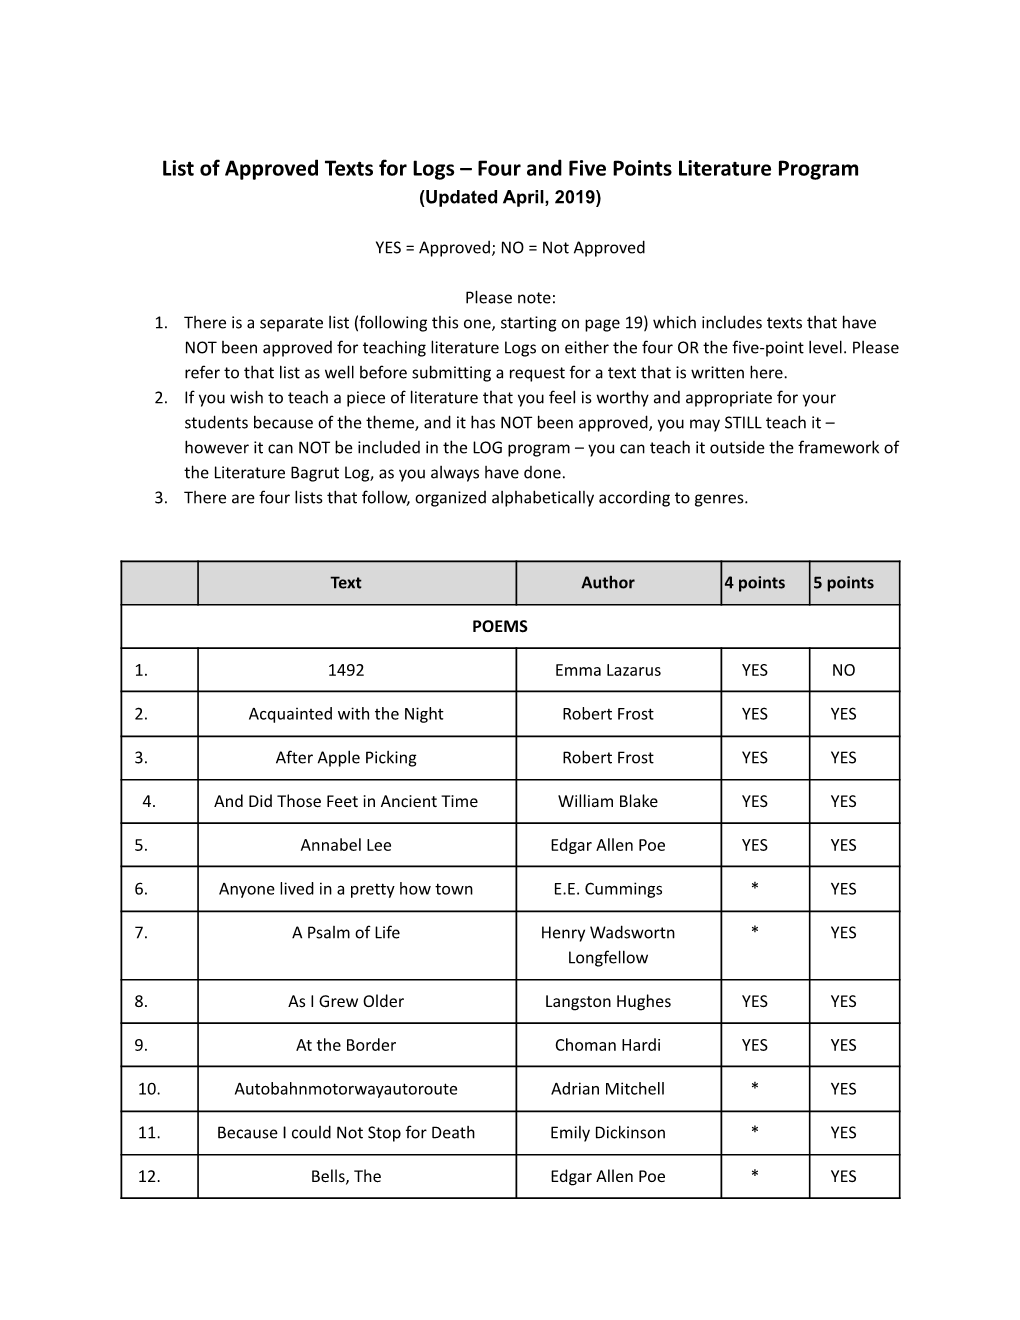 List of Approved Texts for Logs – Four and Five Points Literature Program (Updated April, 2019)